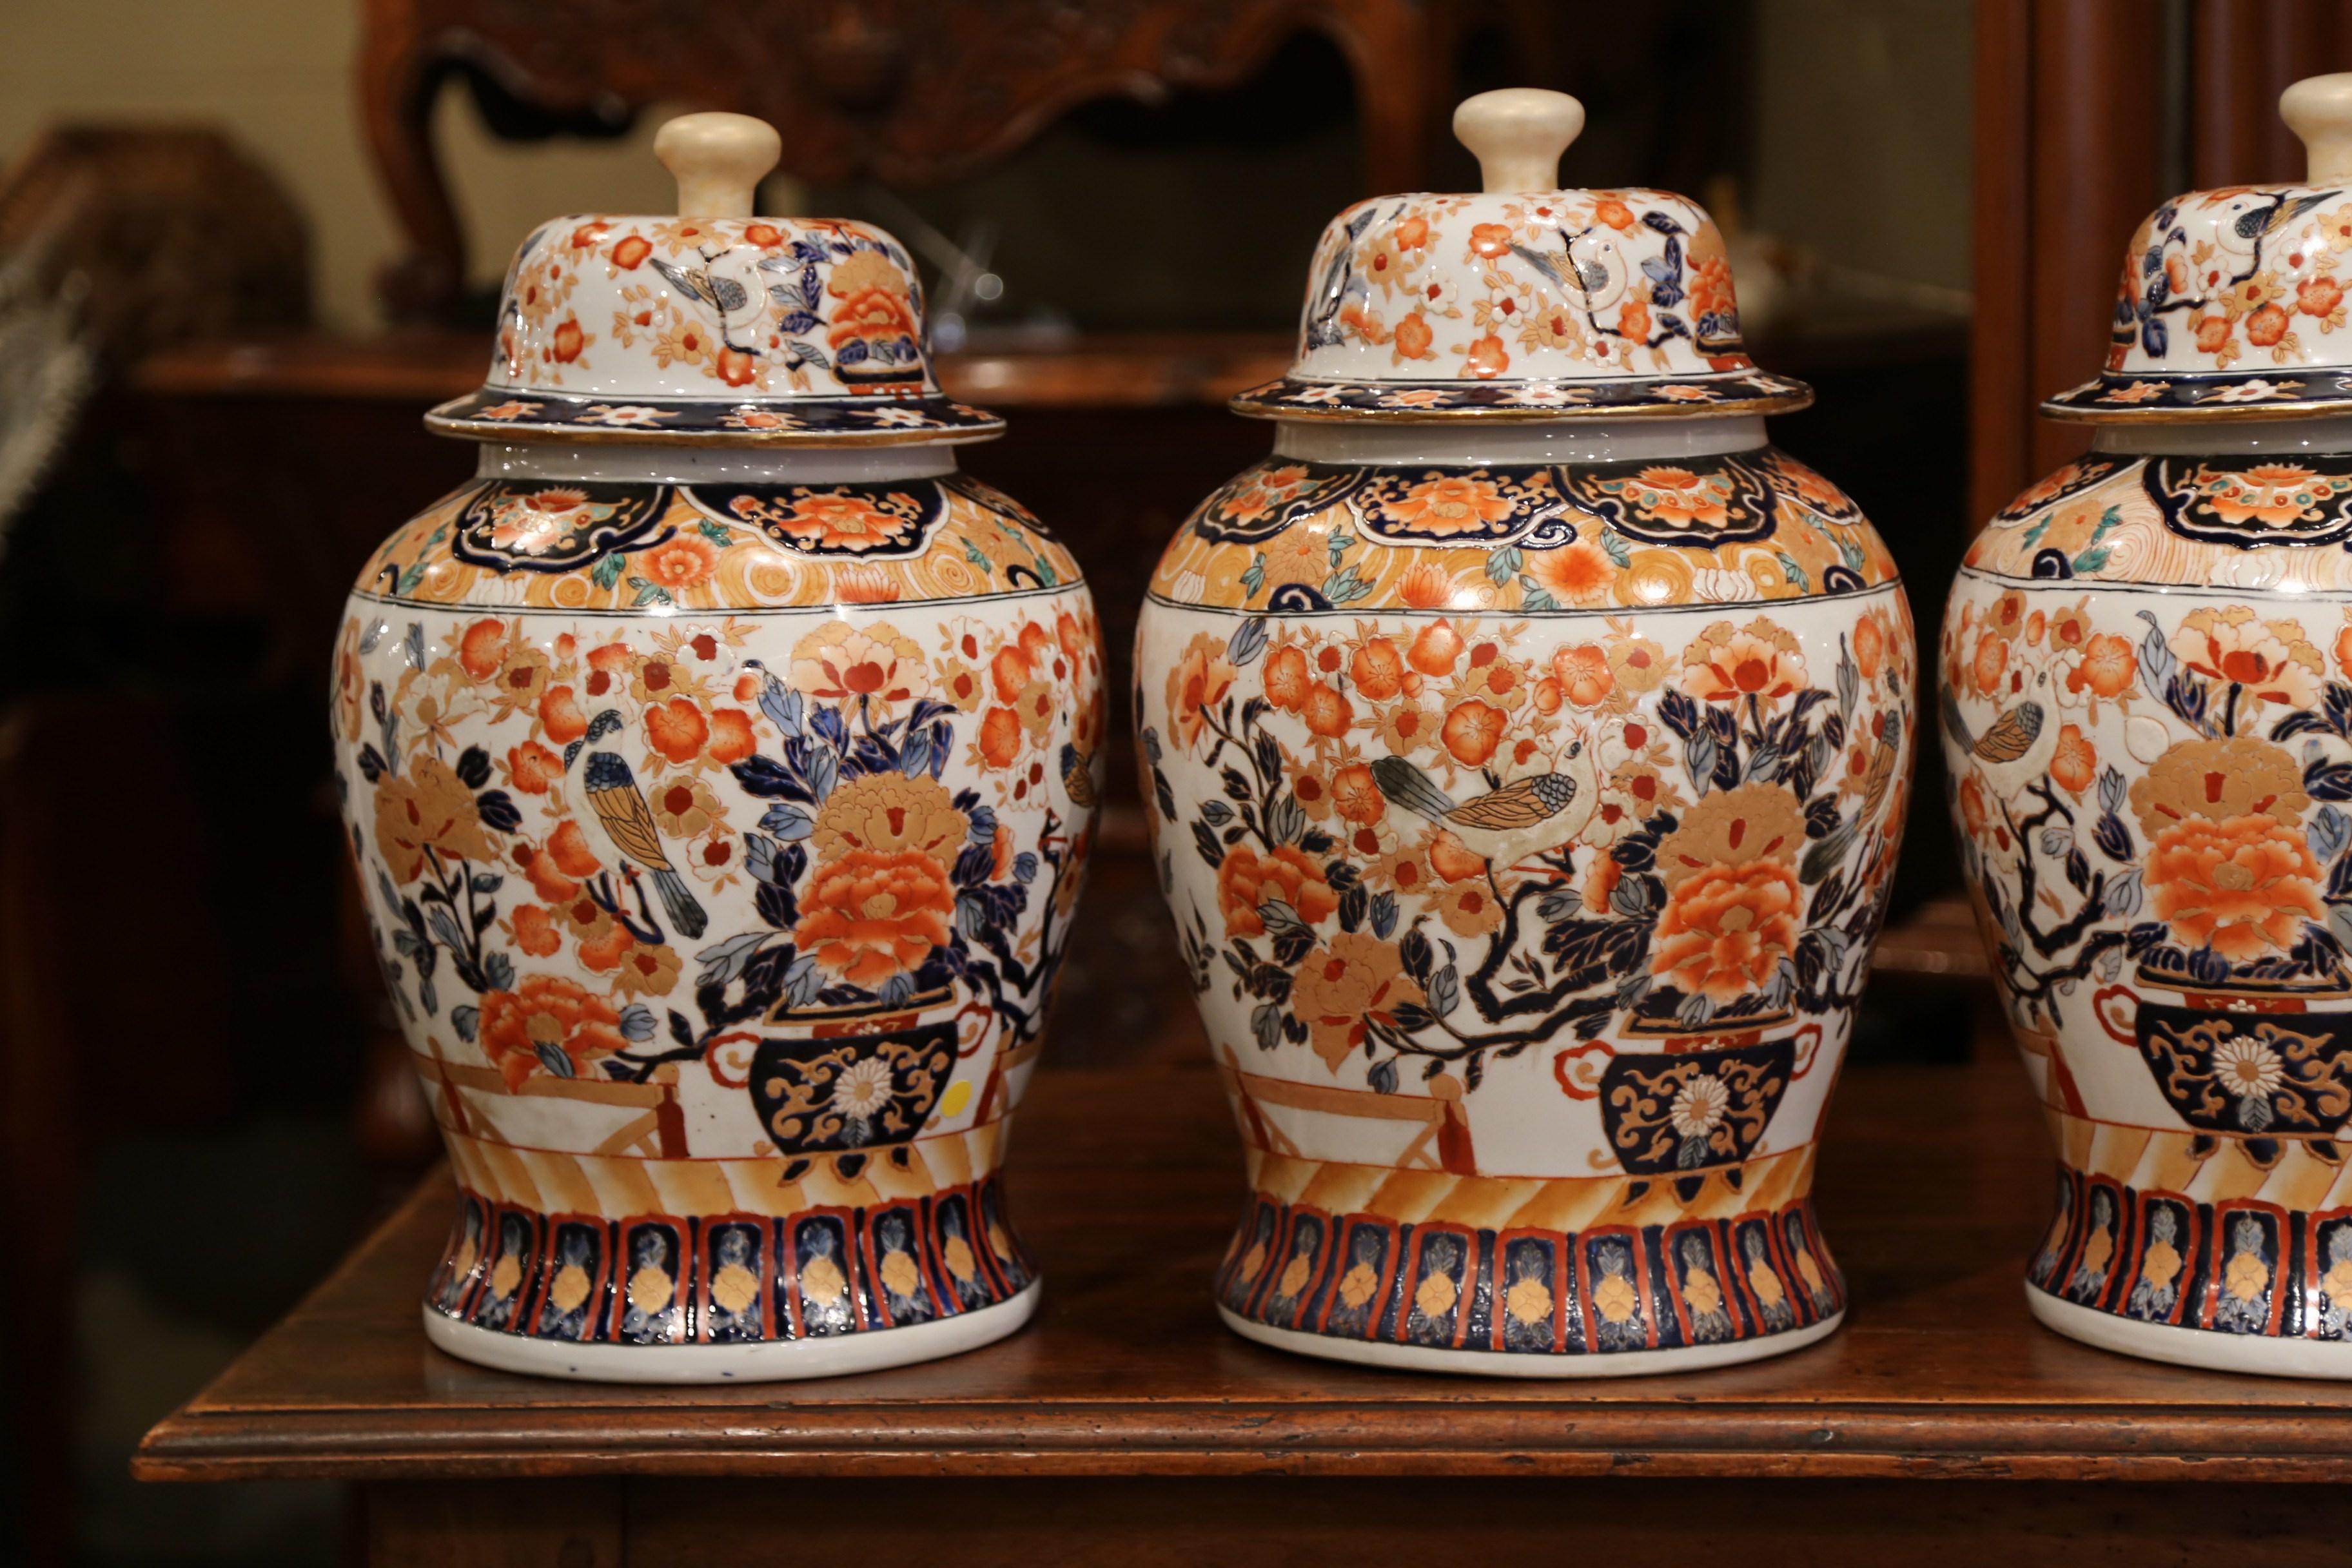 Decorate a console or mantle with this important set of colorful antique porcelain ginger jars. Created in China, circa 1920, each exotic, hand carved vase is decorated with a classic, Asian, floral and bird motif in a blue, white and orange